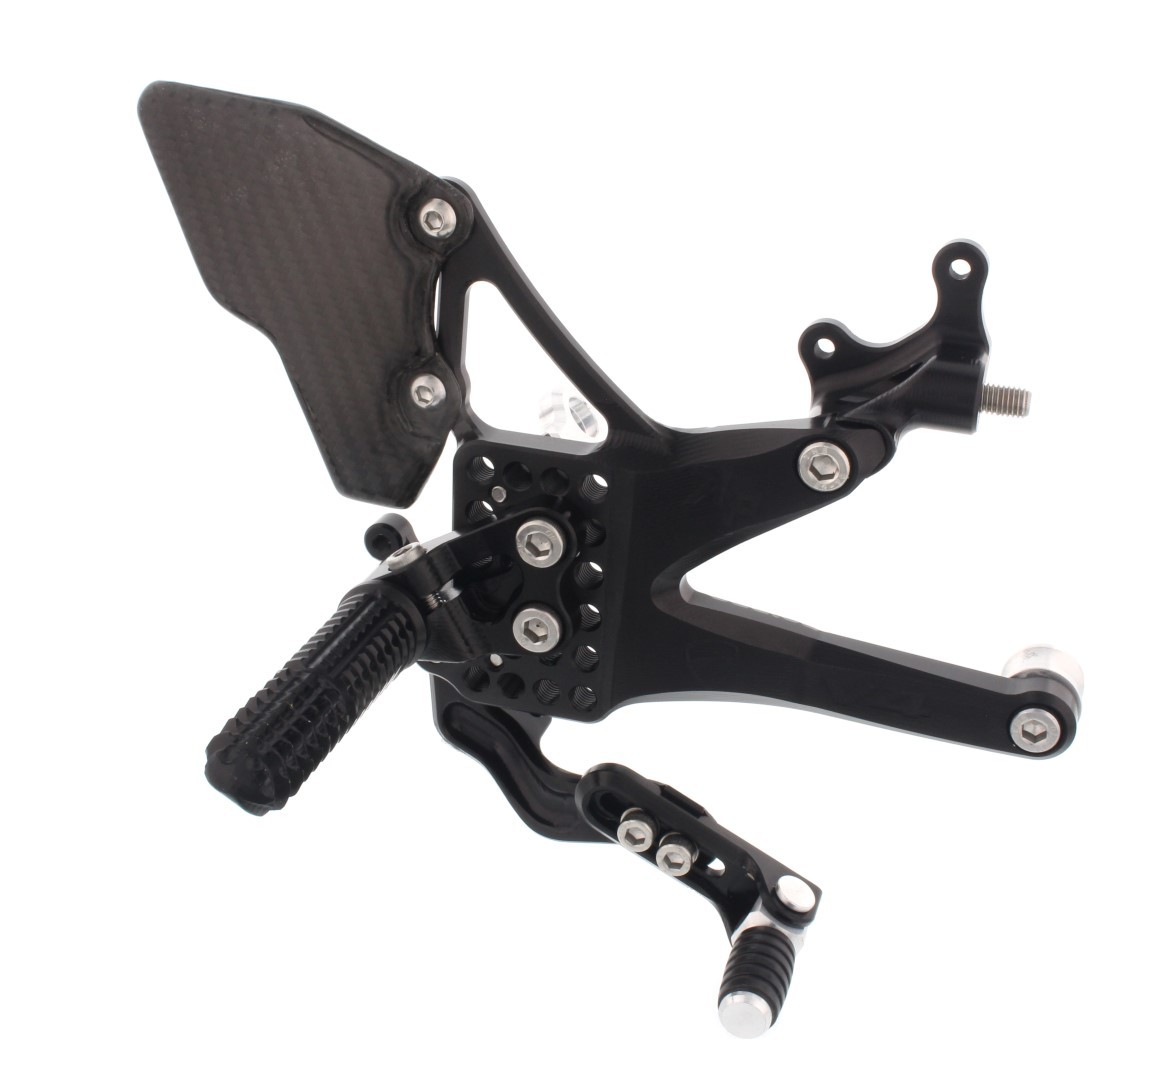 Attack Performance Billet Aluminum Adustable Rearsets for Ducati V4 Panigale